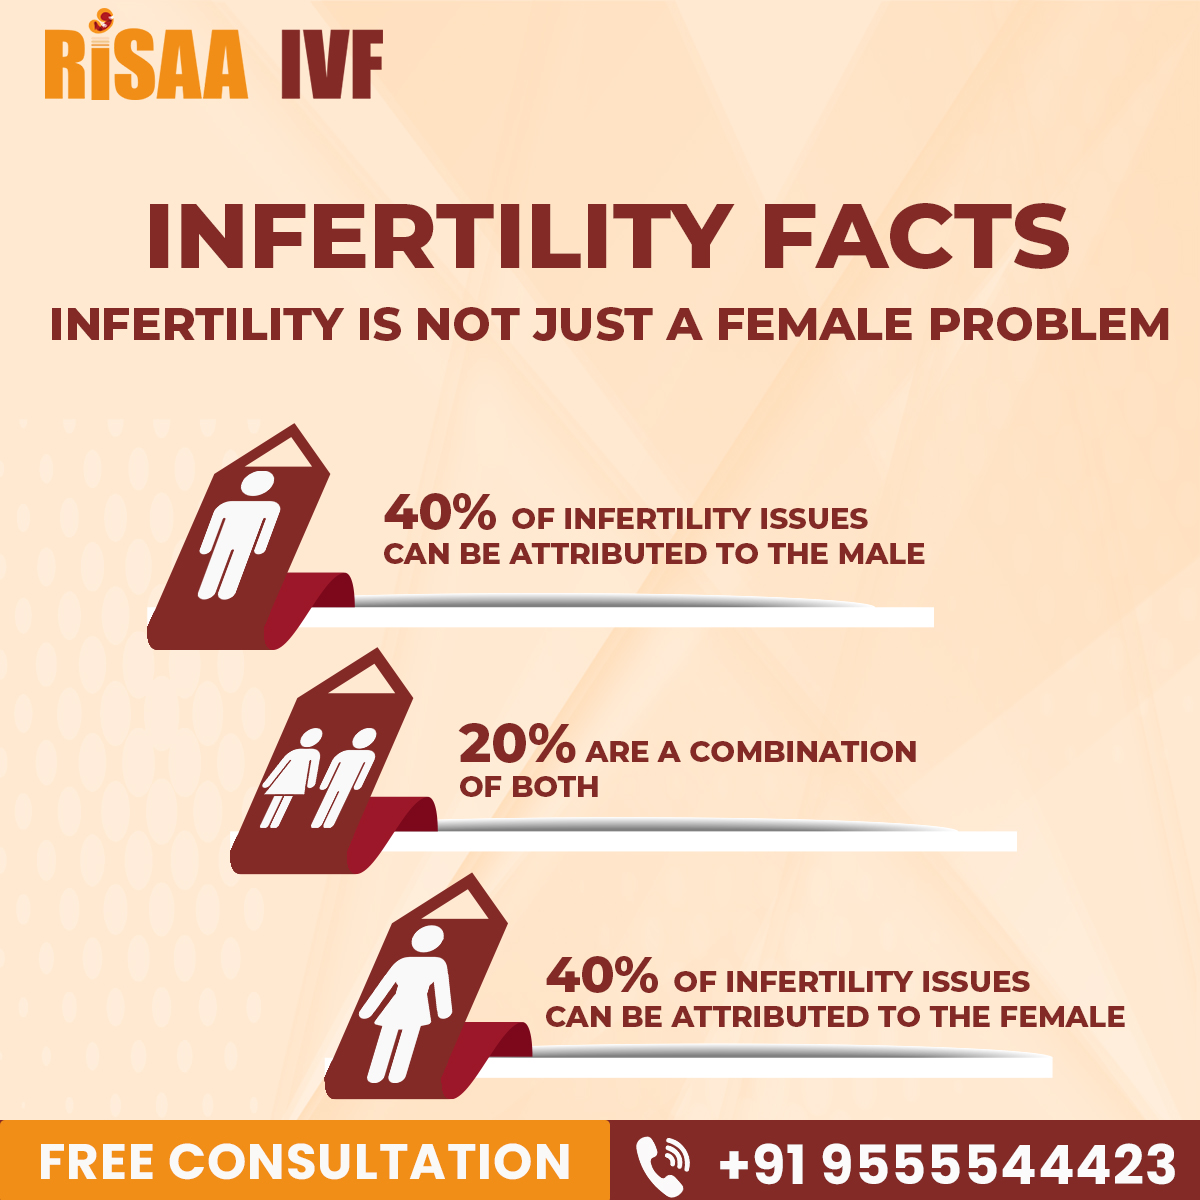 ' Infertility isn't just a 'her' issue!  Did you know? Both men and women can face fertility challenges. Let's break the silence and raise awareness together!  #FertilityFacts #BreakTheStigma'